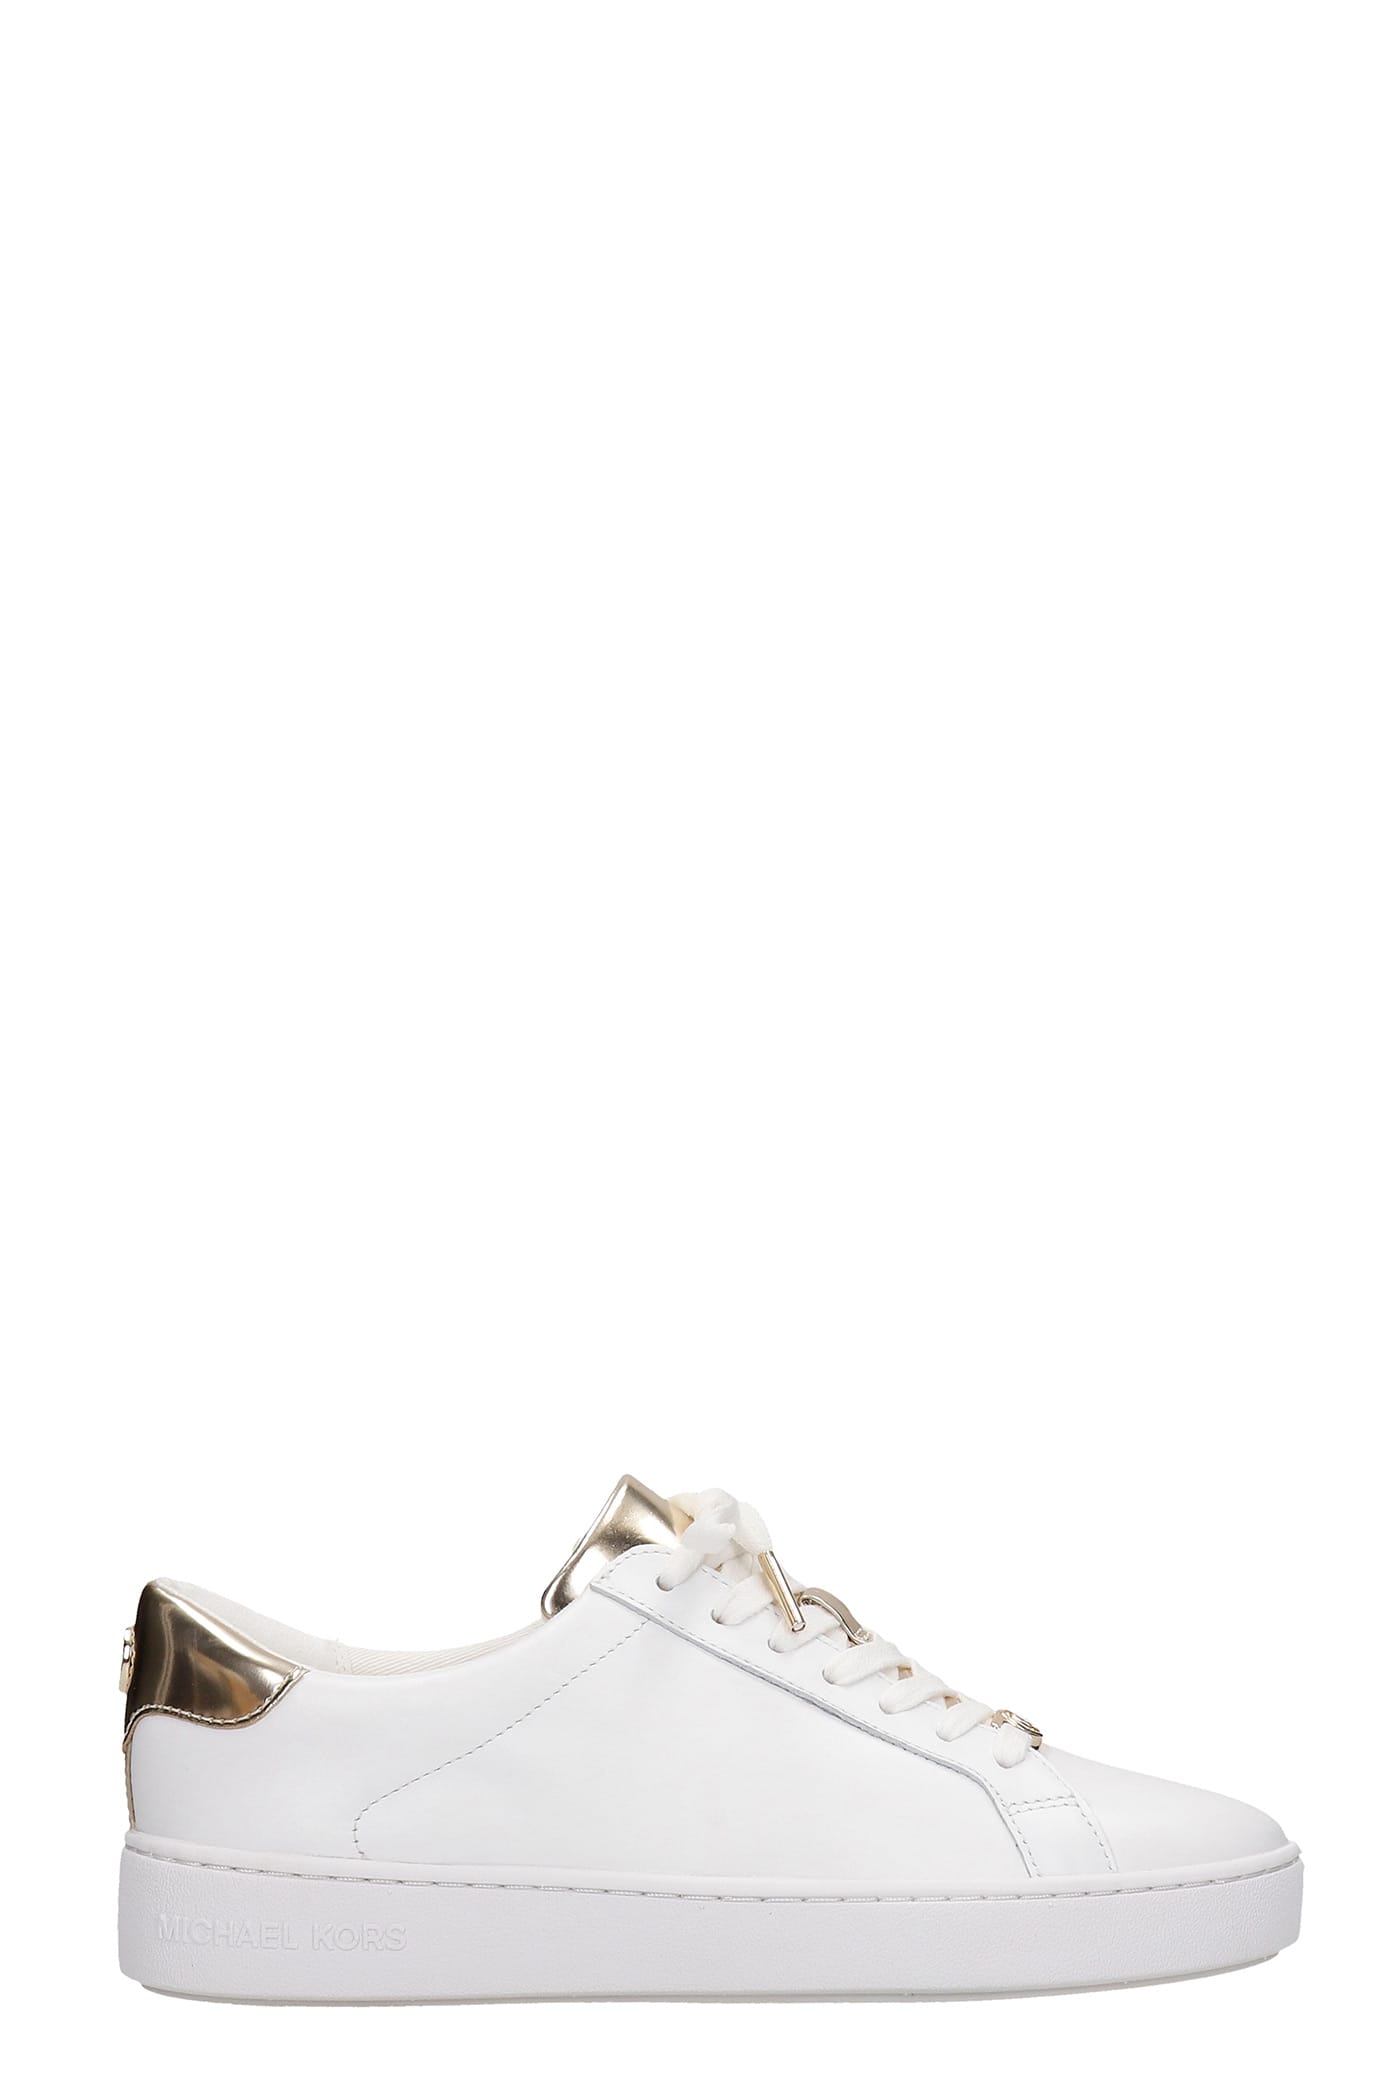 Buy MICHAEL Michael Kors Irving Sneakers In White Leather online, shop MICHAEL Michael Kors shoes with free shipping